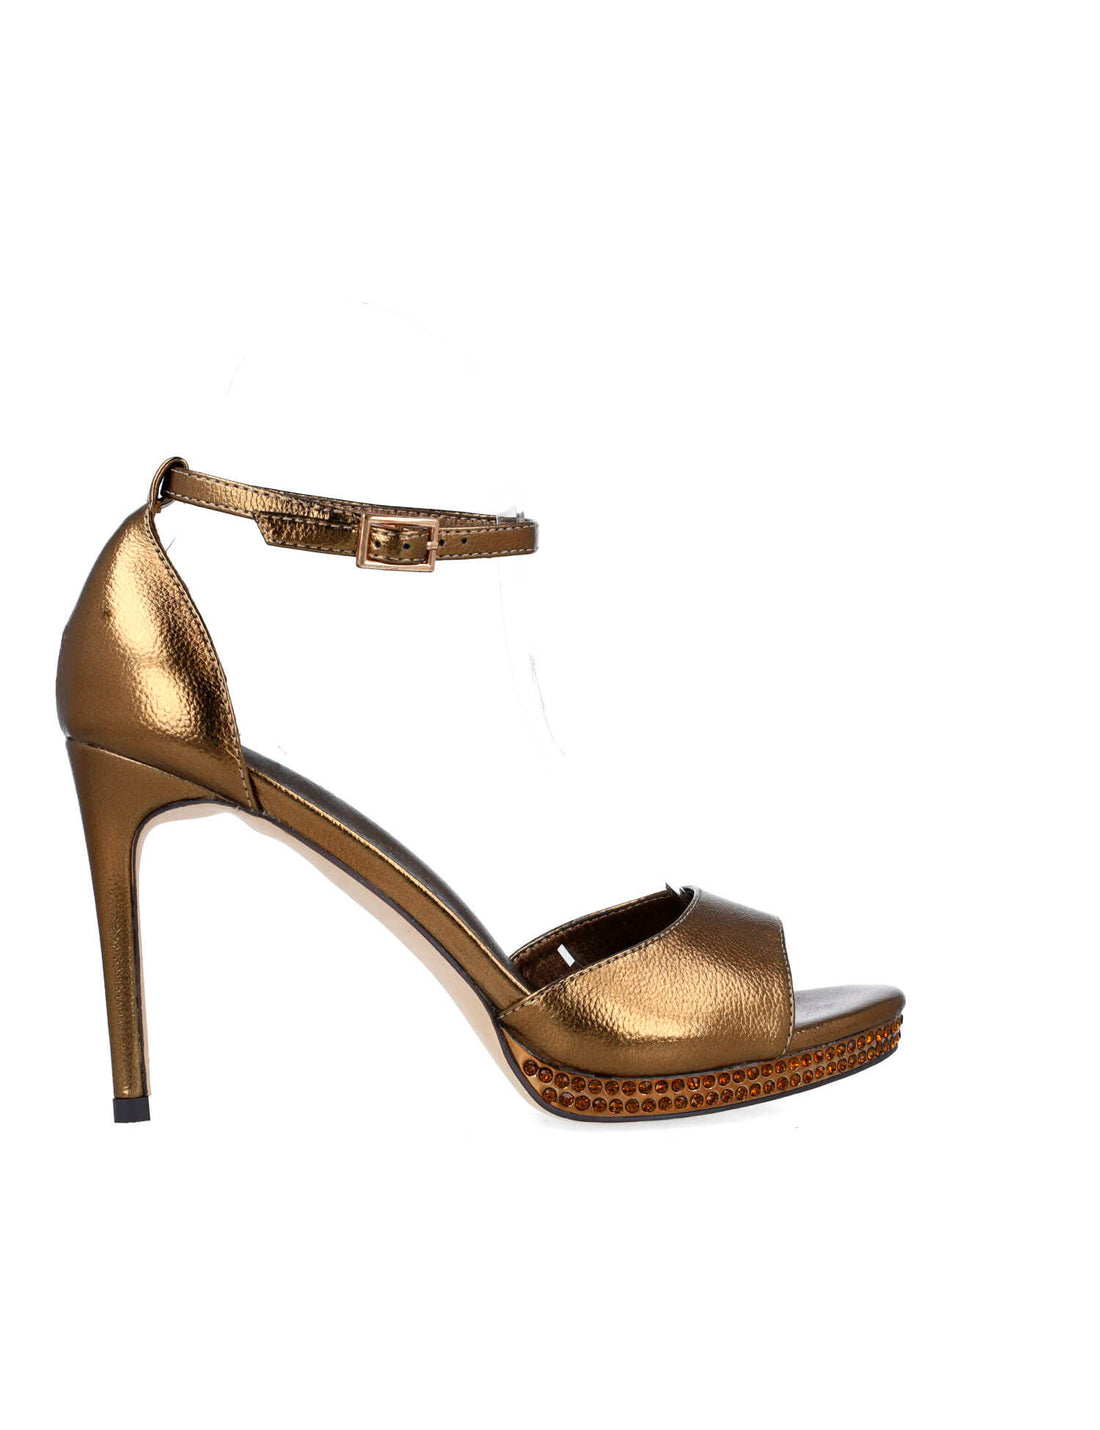 Shiny Brown High-Heel Sandals With Ankle Strap_25157_95_01